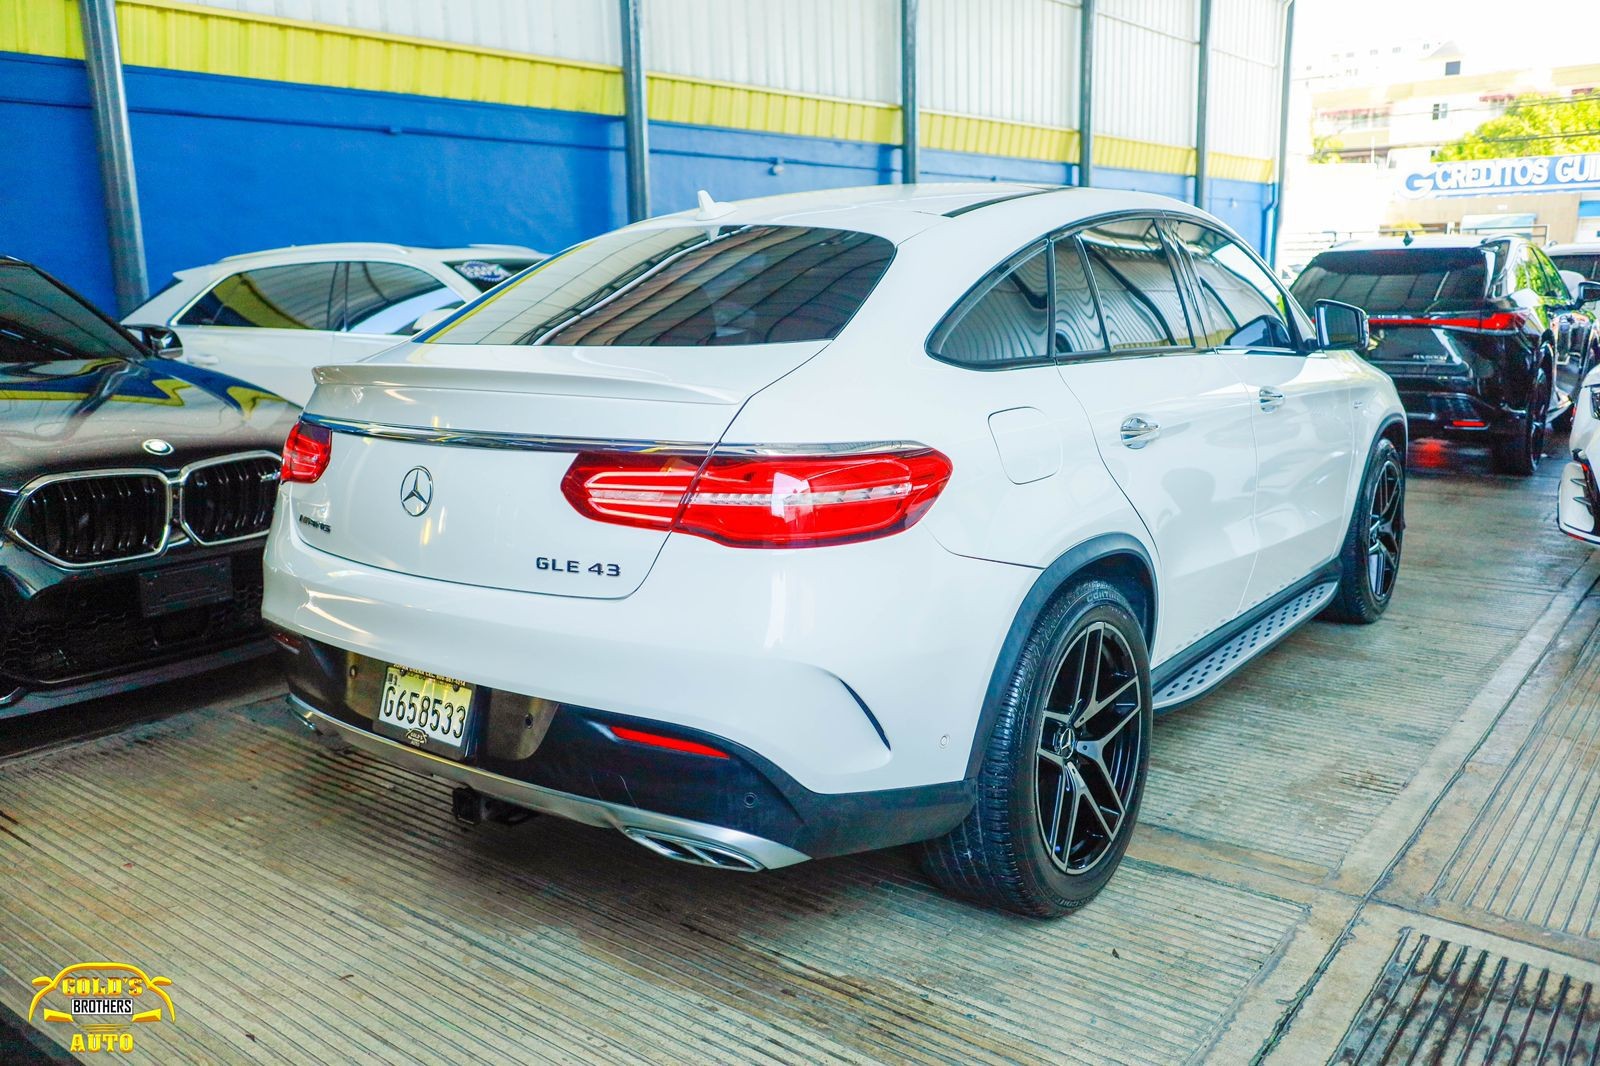 jeepetas y camionetas - Mercedes Benz GLE 43 Coupe 2017 Clean Carfax 4